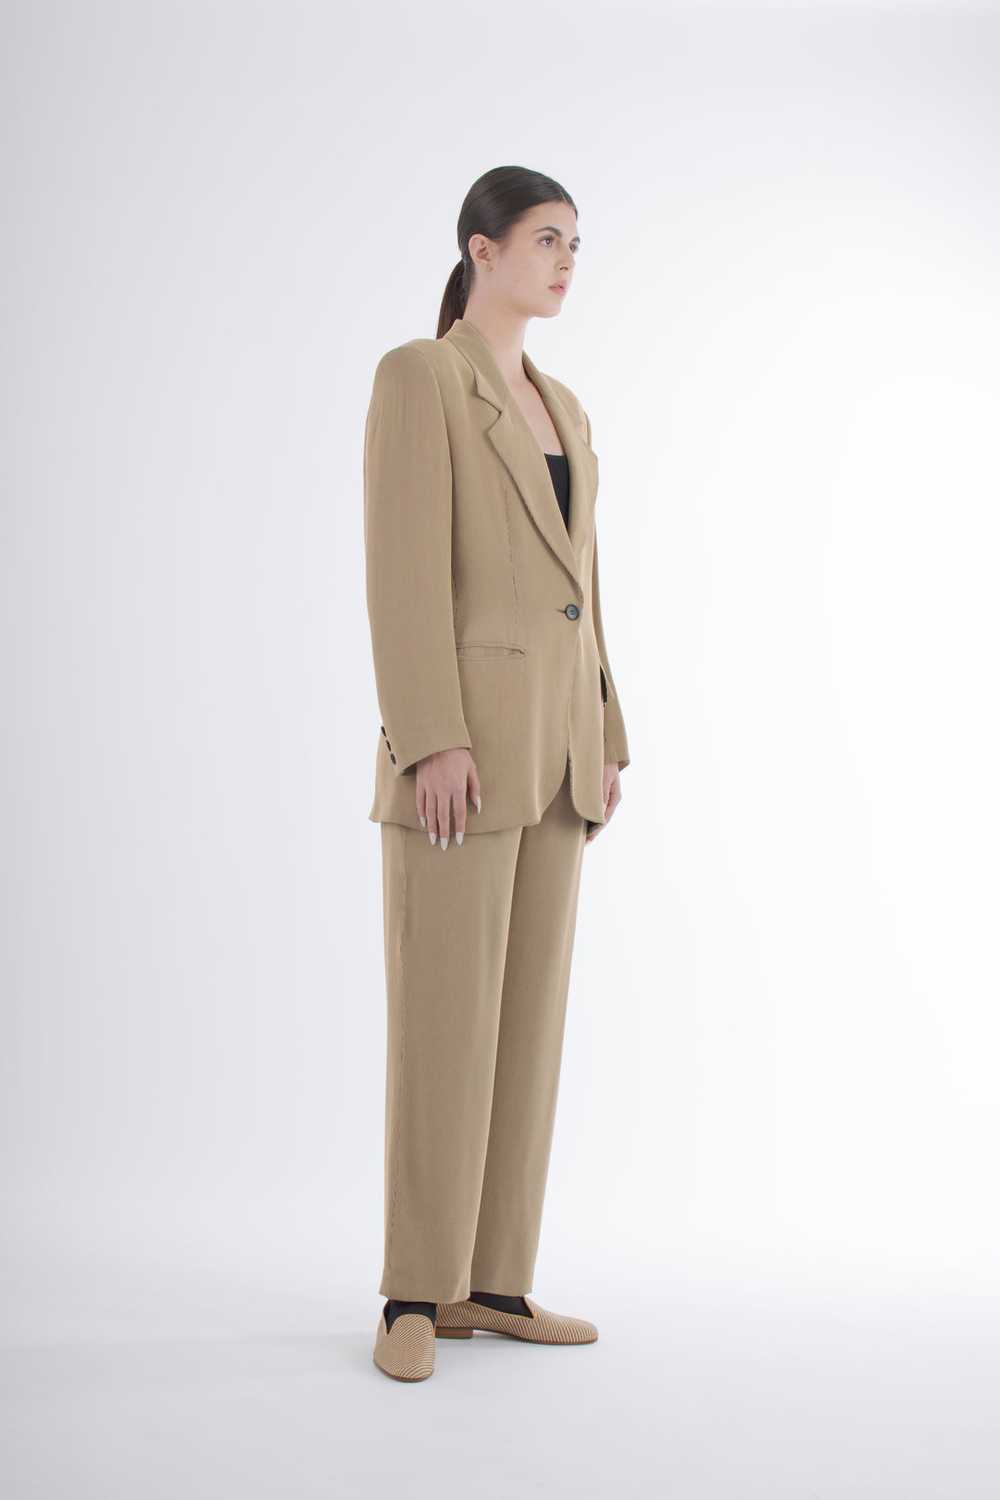 1990's Gucci by Tom Ford Striped Suit - image 3